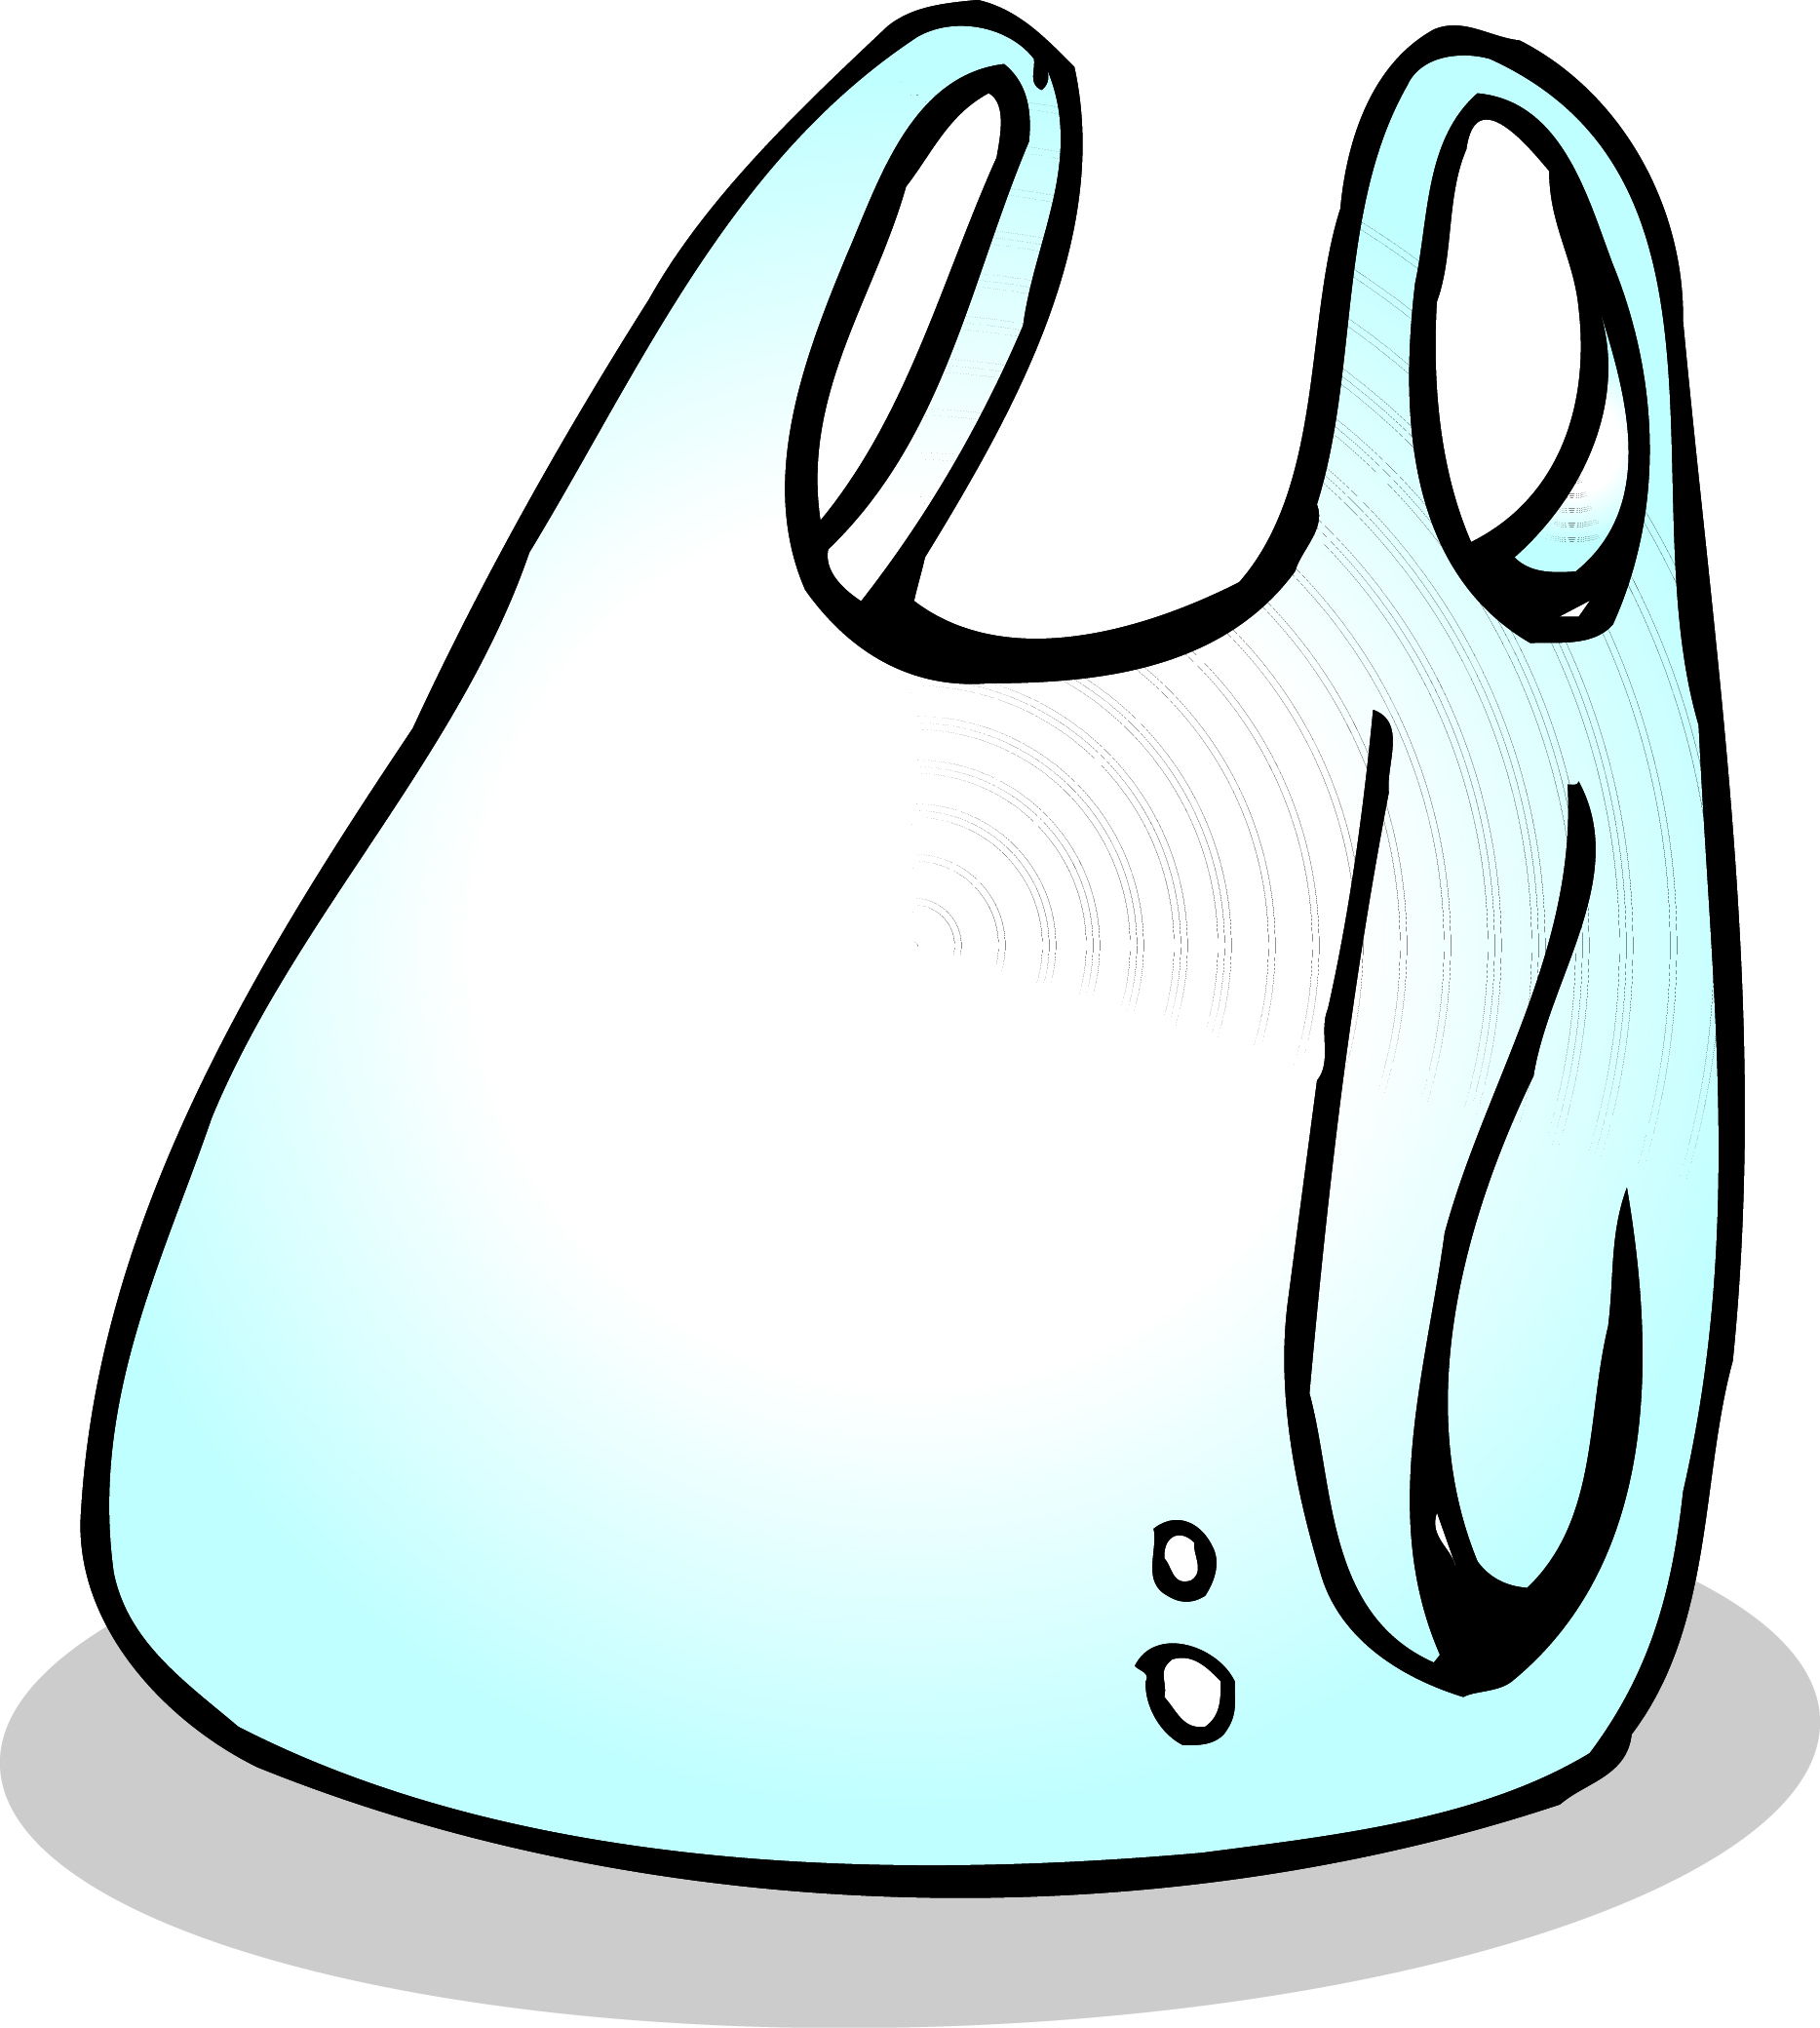 Plastic bags clipart - Clipground